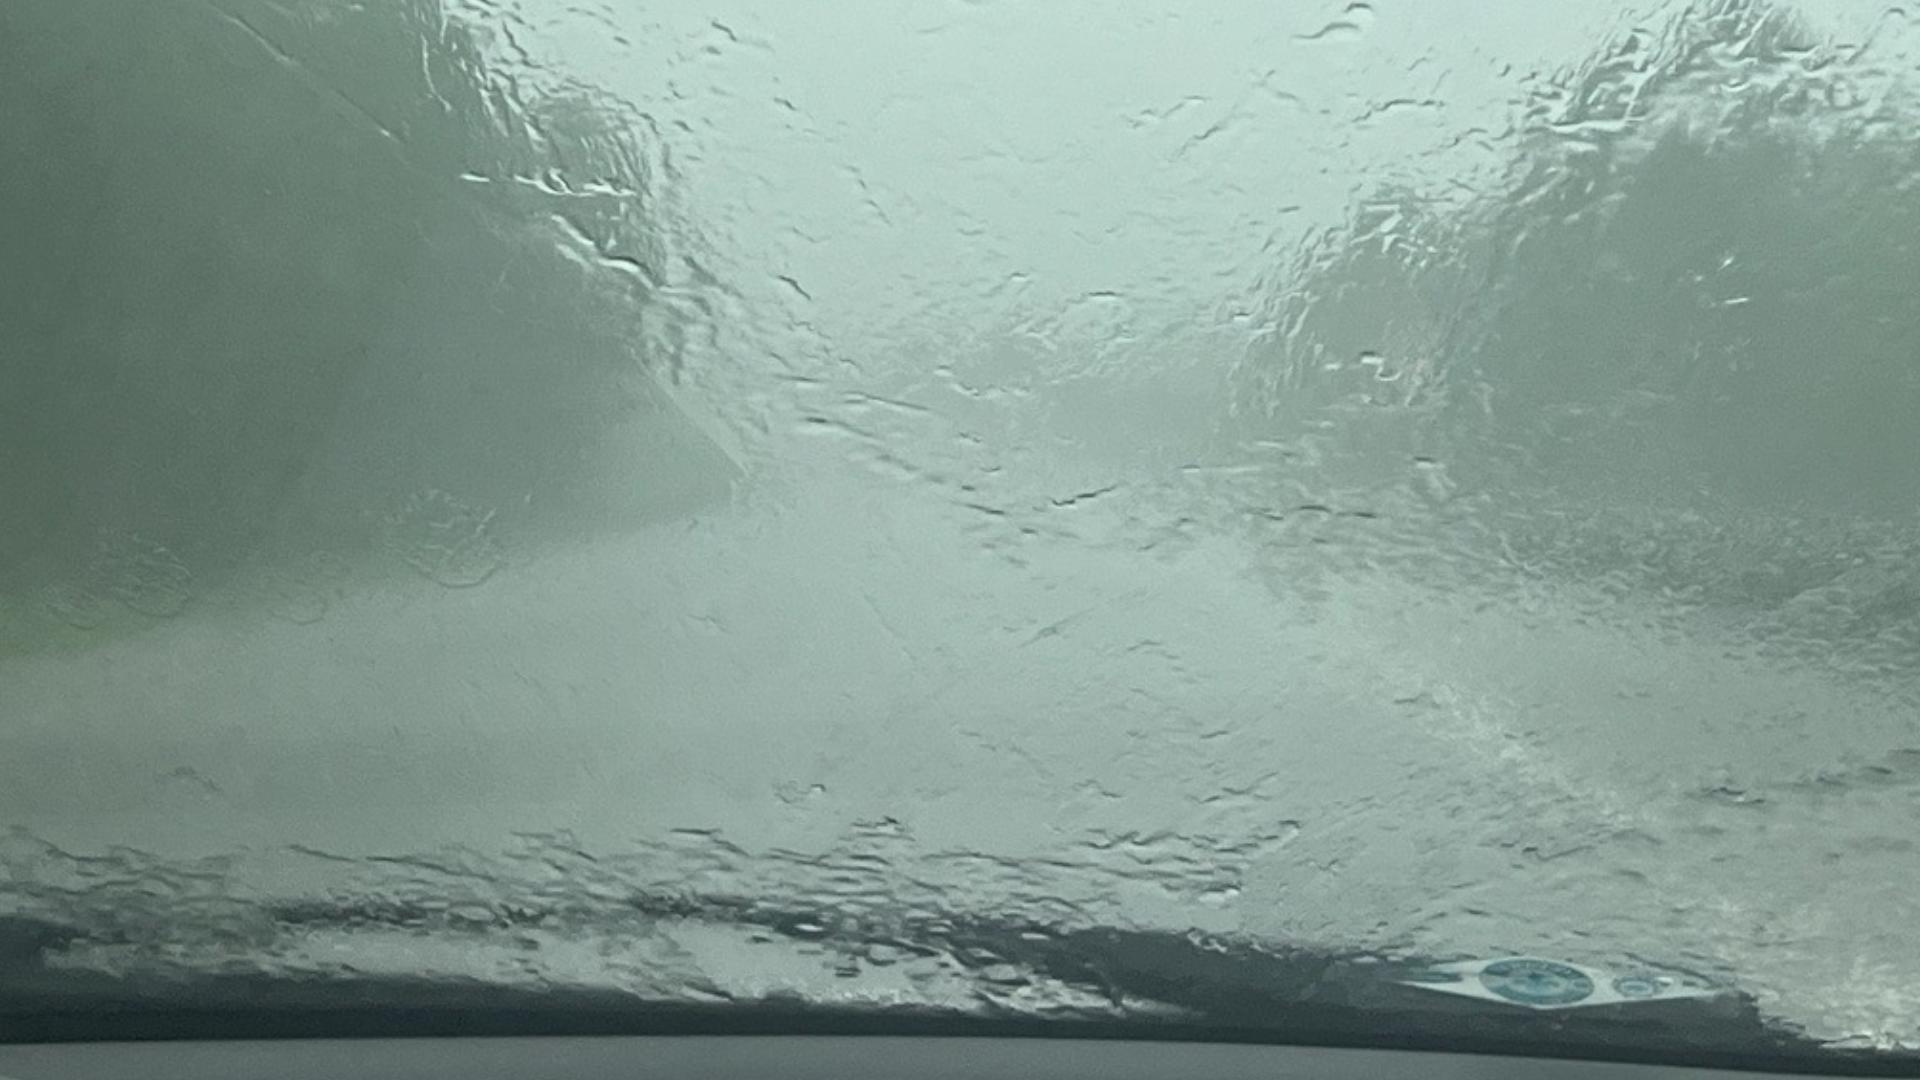 Heavy rain during Thursday's storms created reduced visibility for drivers on the roads.